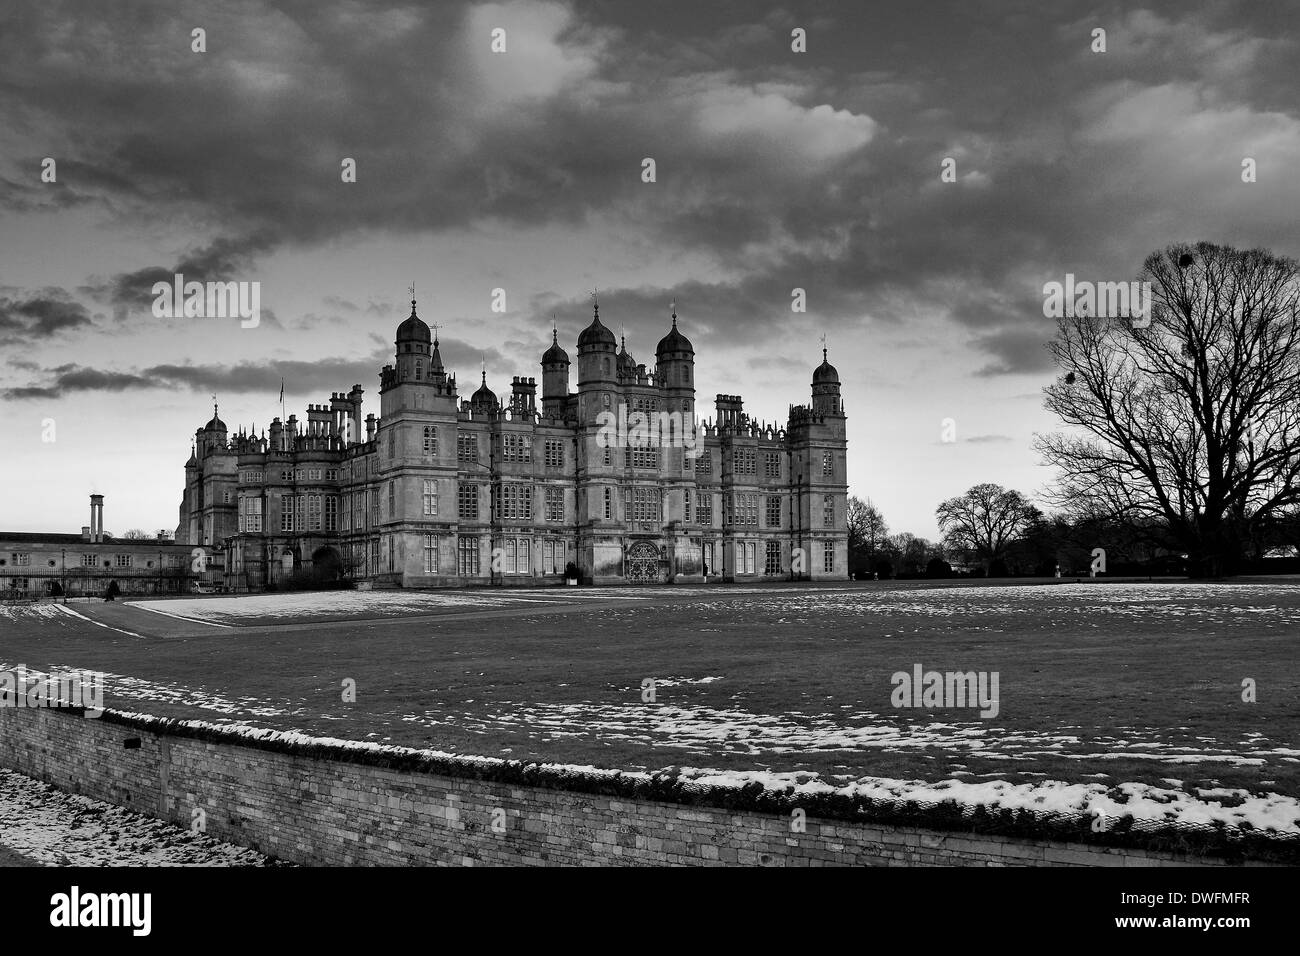 Sunset over Burghley House Elizabethan Stately Home on the border of Cambridgeshire and Lincolnshire, England, Britain, UK Stock Photo